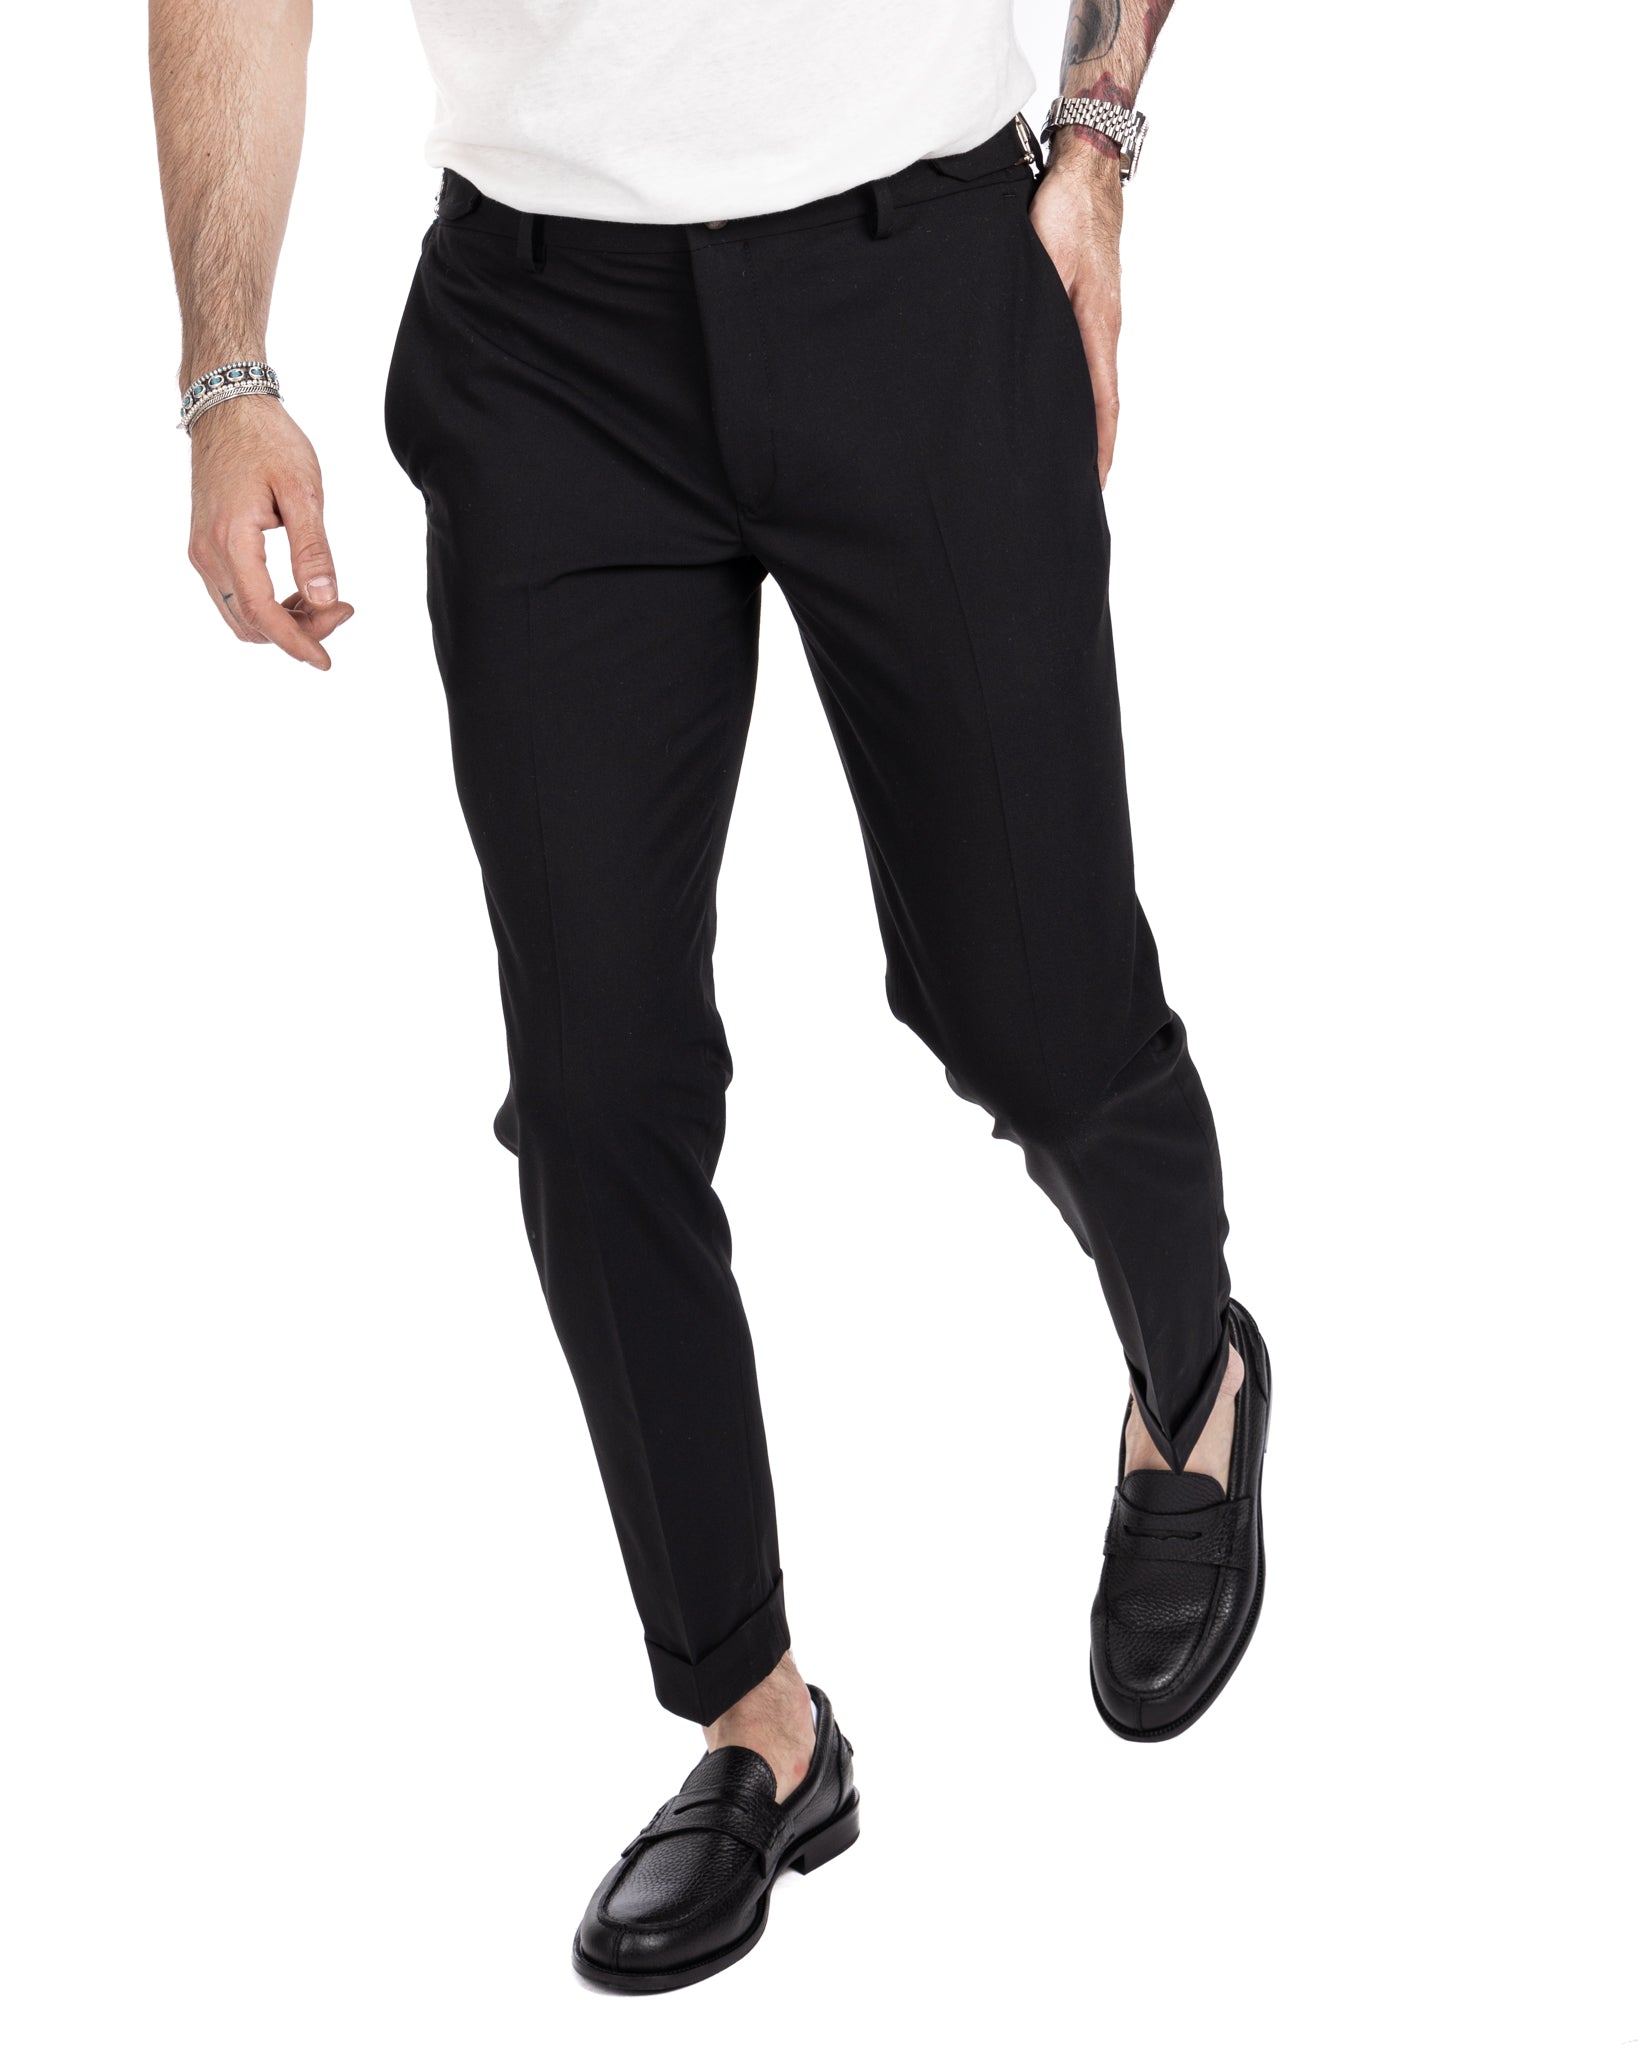 Trani - trousers with black buckles